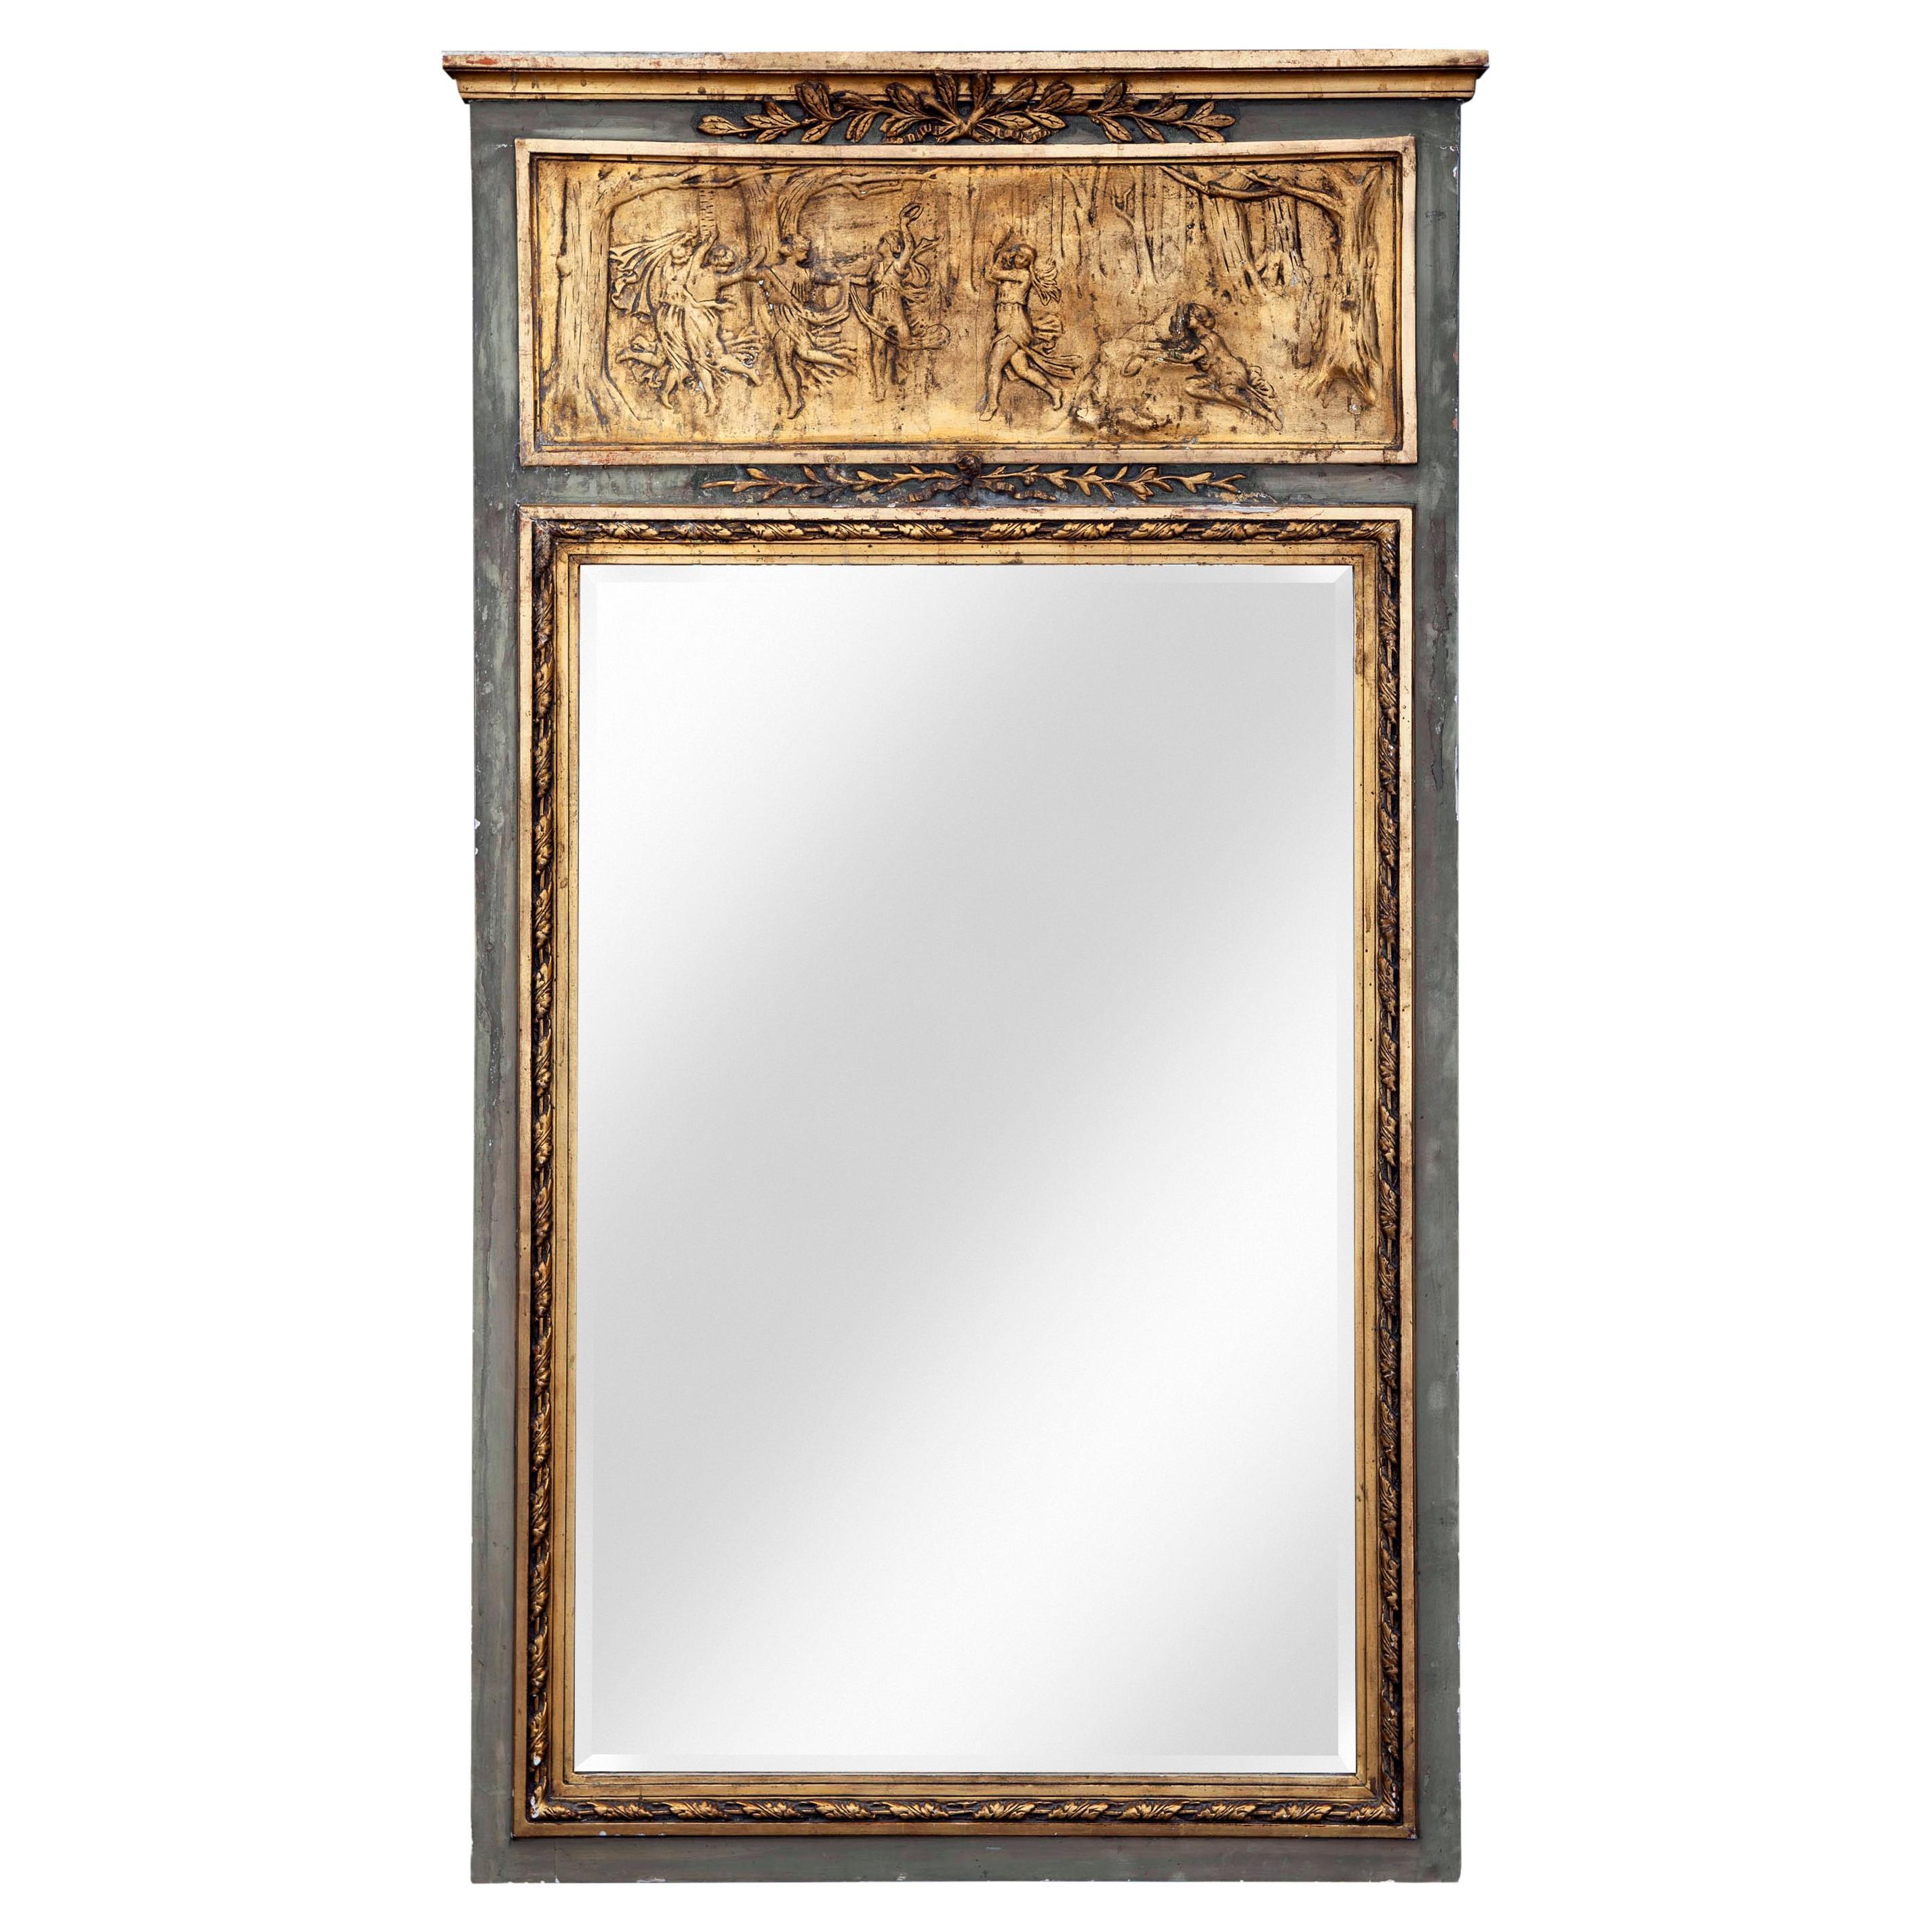 Trumeau Mirror with Dancers in Giltwood / French Gray Frame For Sale